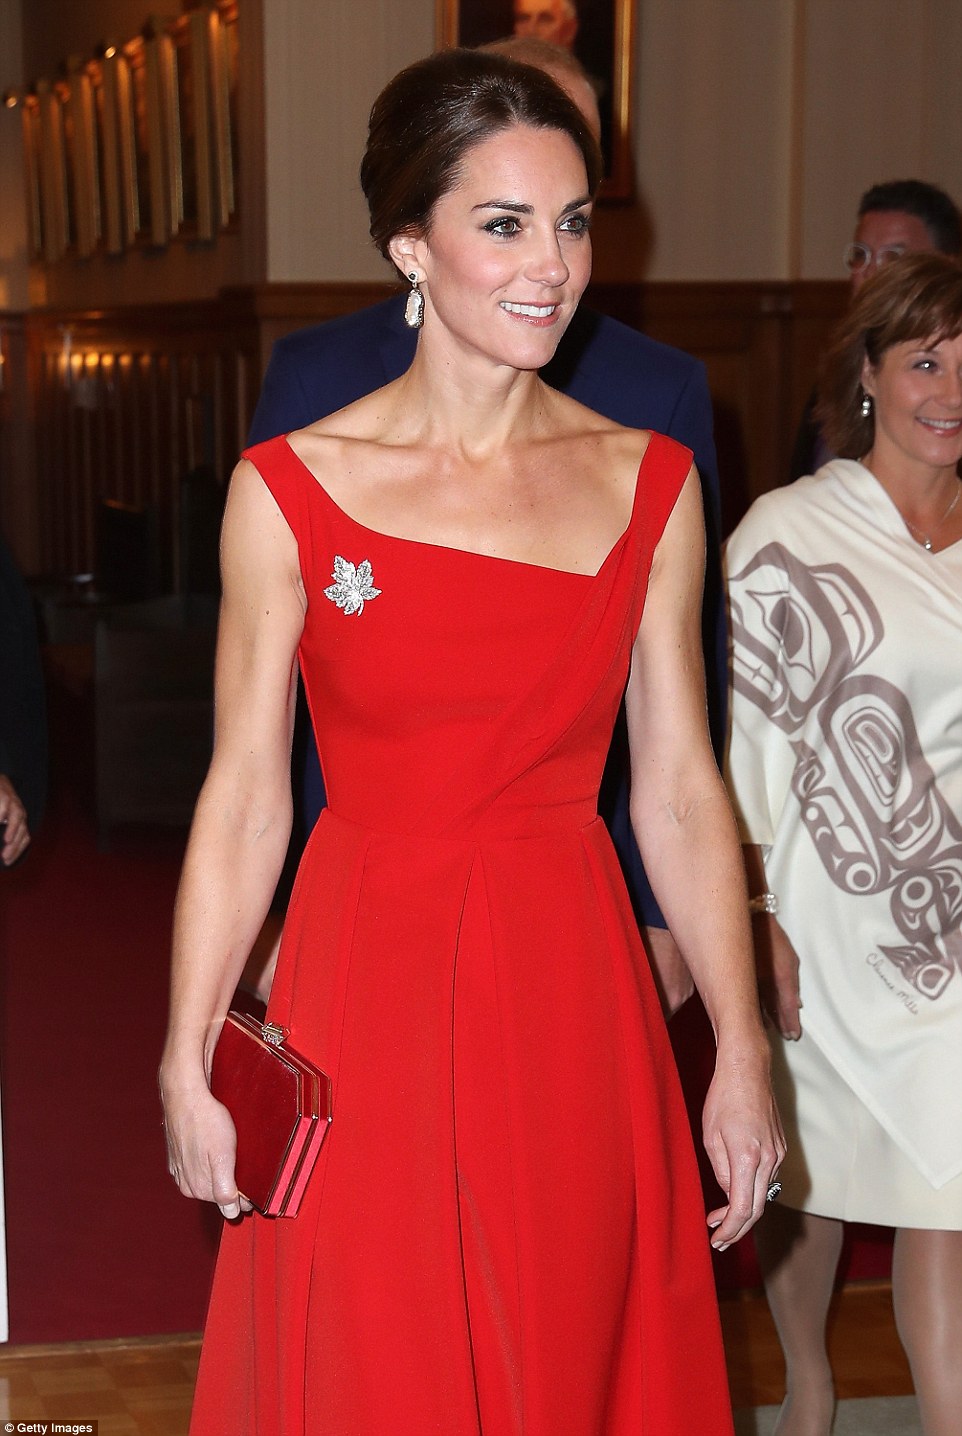 Turning heads: Kate looked stunning in her red dress and maple leaf brooch, paying homage yet again to the Canadian flag after the red and white patterned dress she wore on her first day in the country